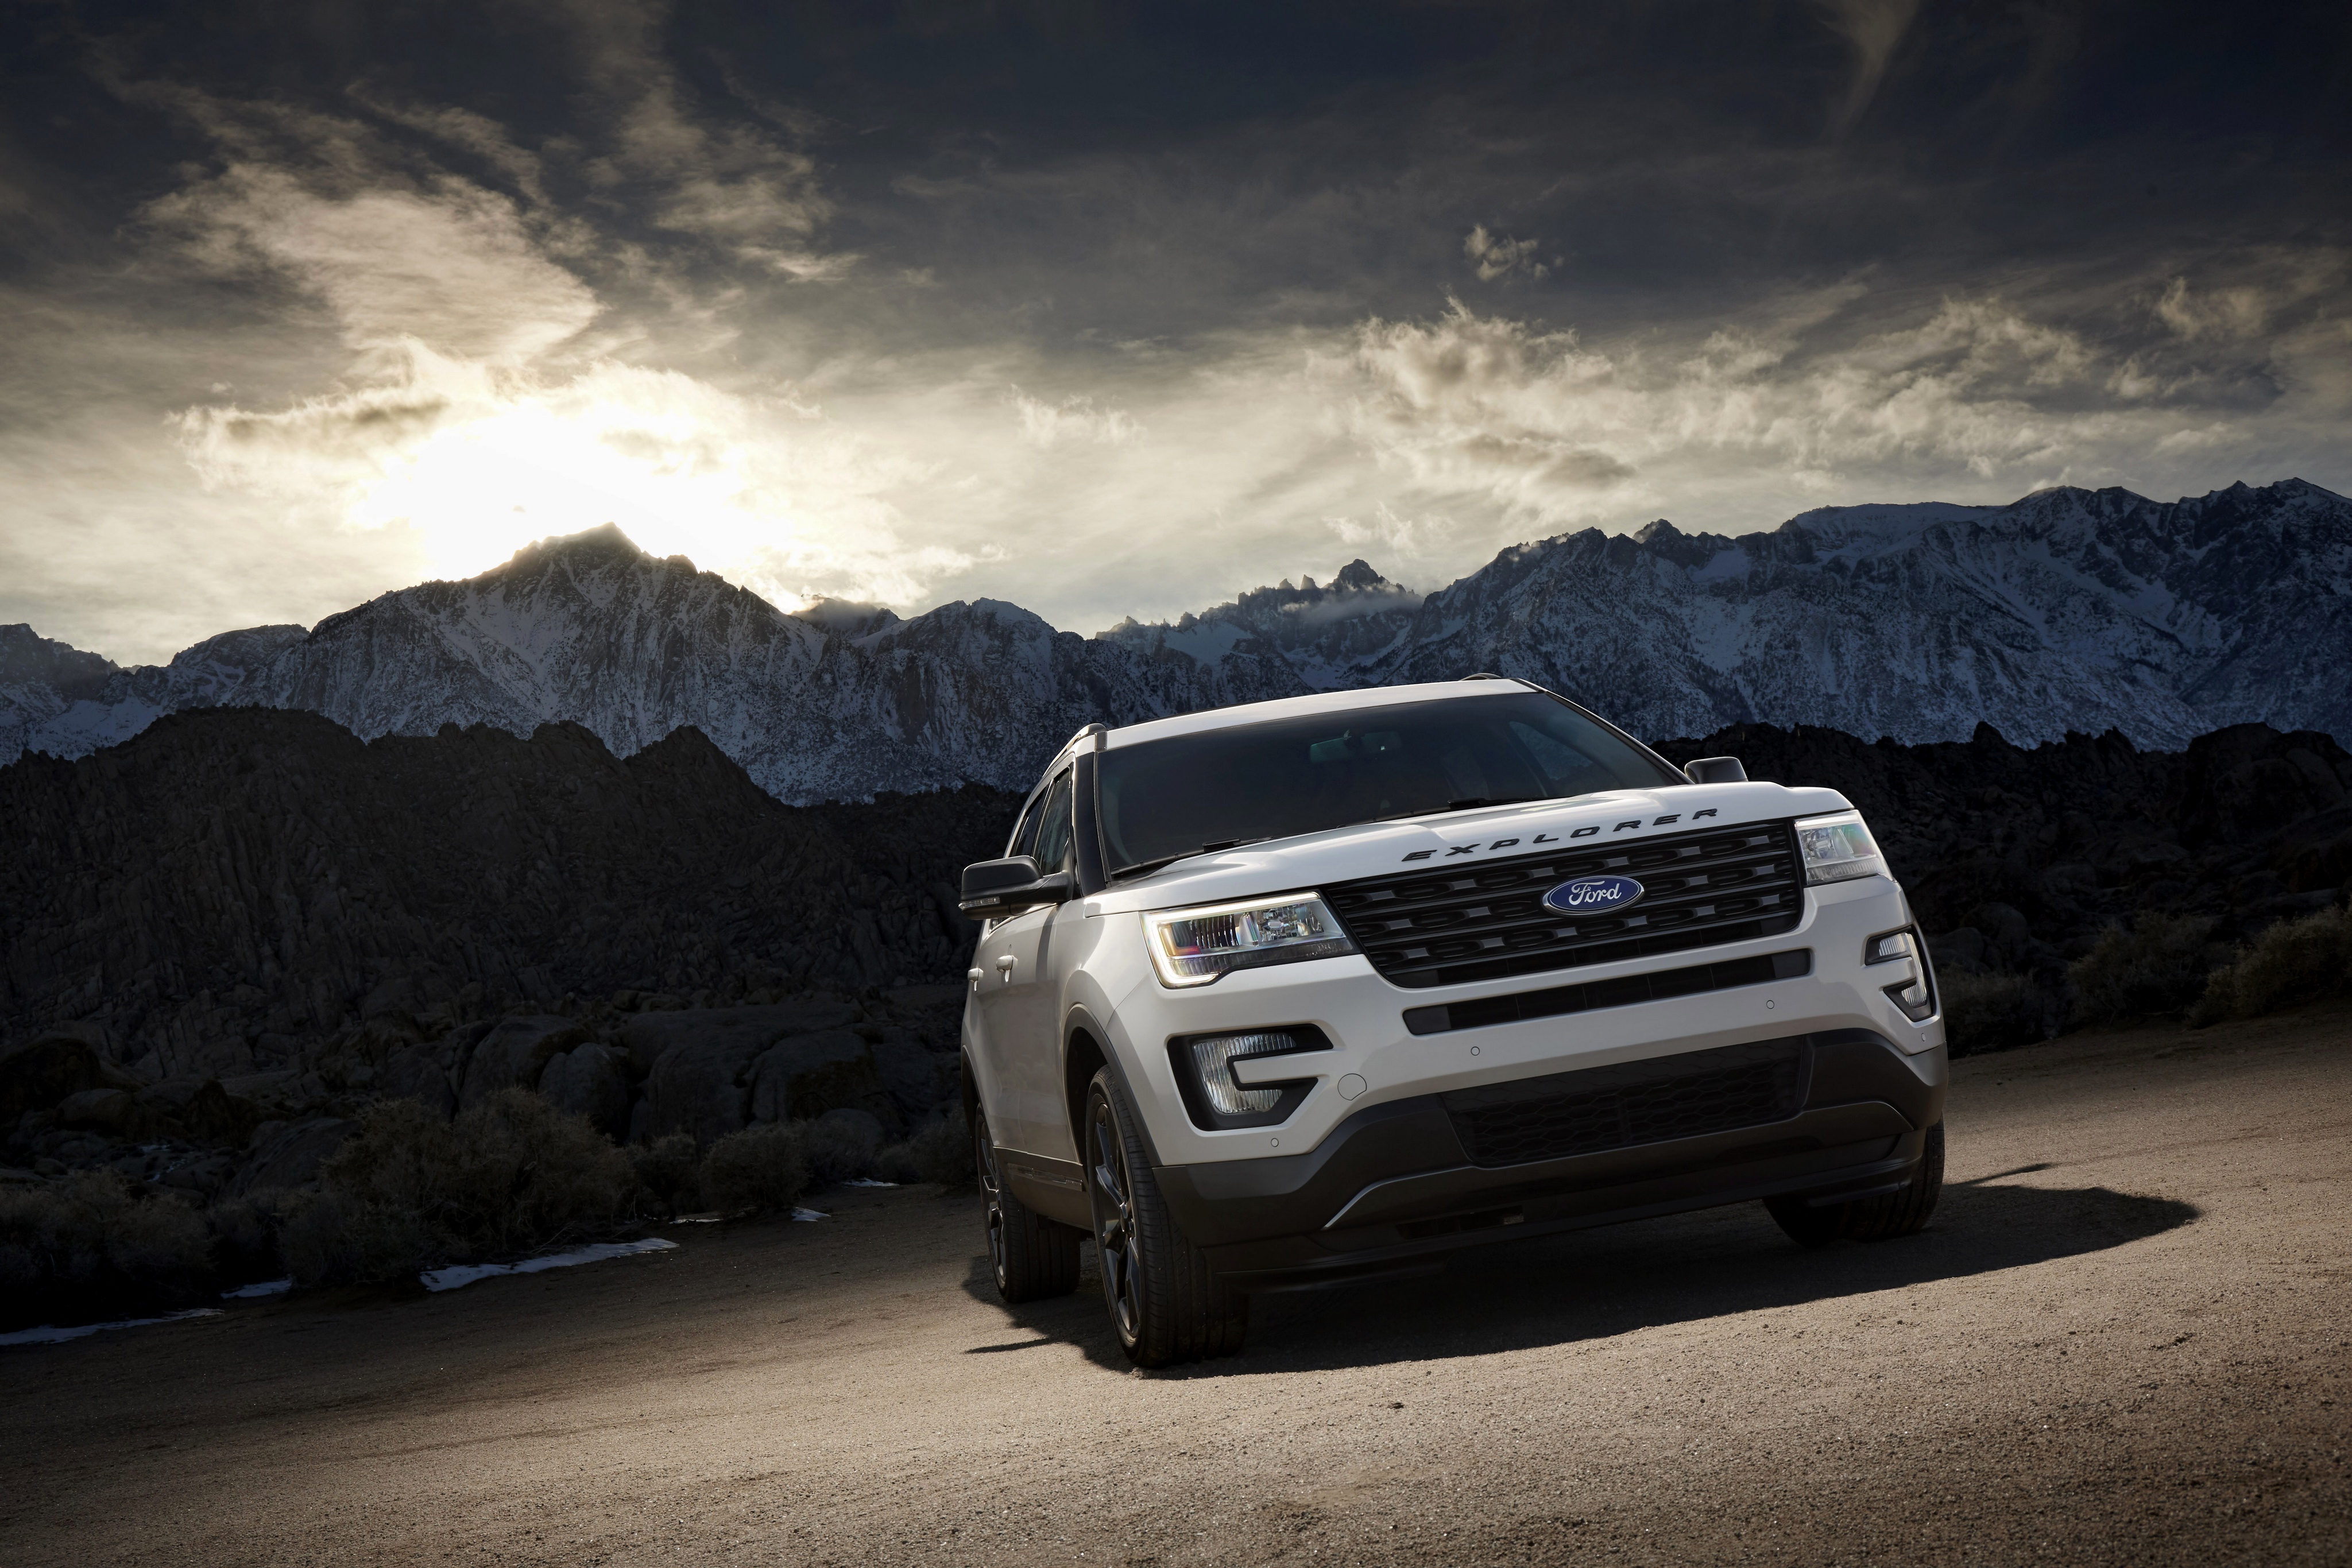 Cool Wallpapers vehicles, ford explorer, car, ford, suv, white car